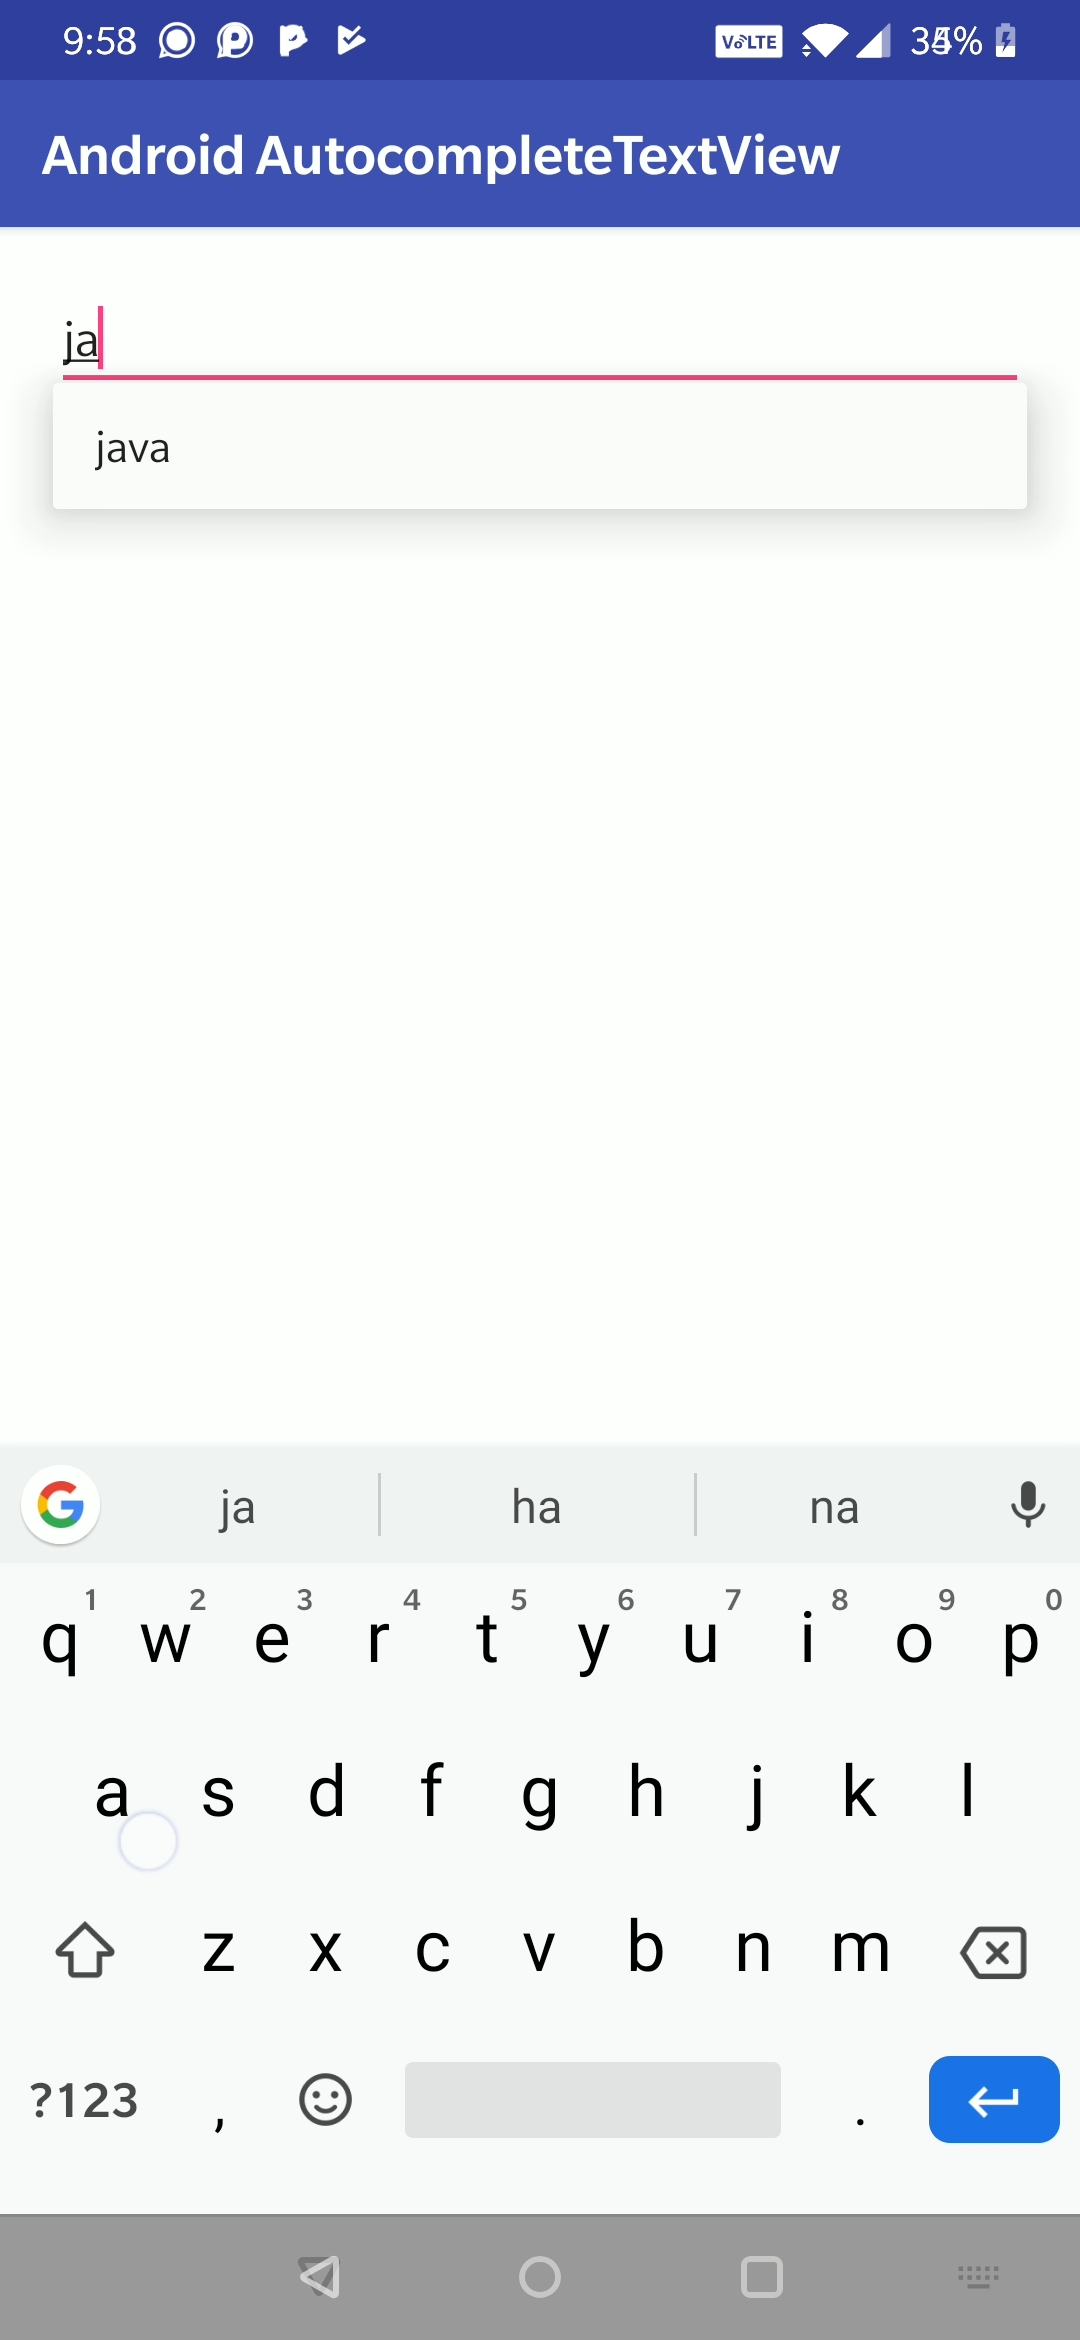 android autocomplete textview output